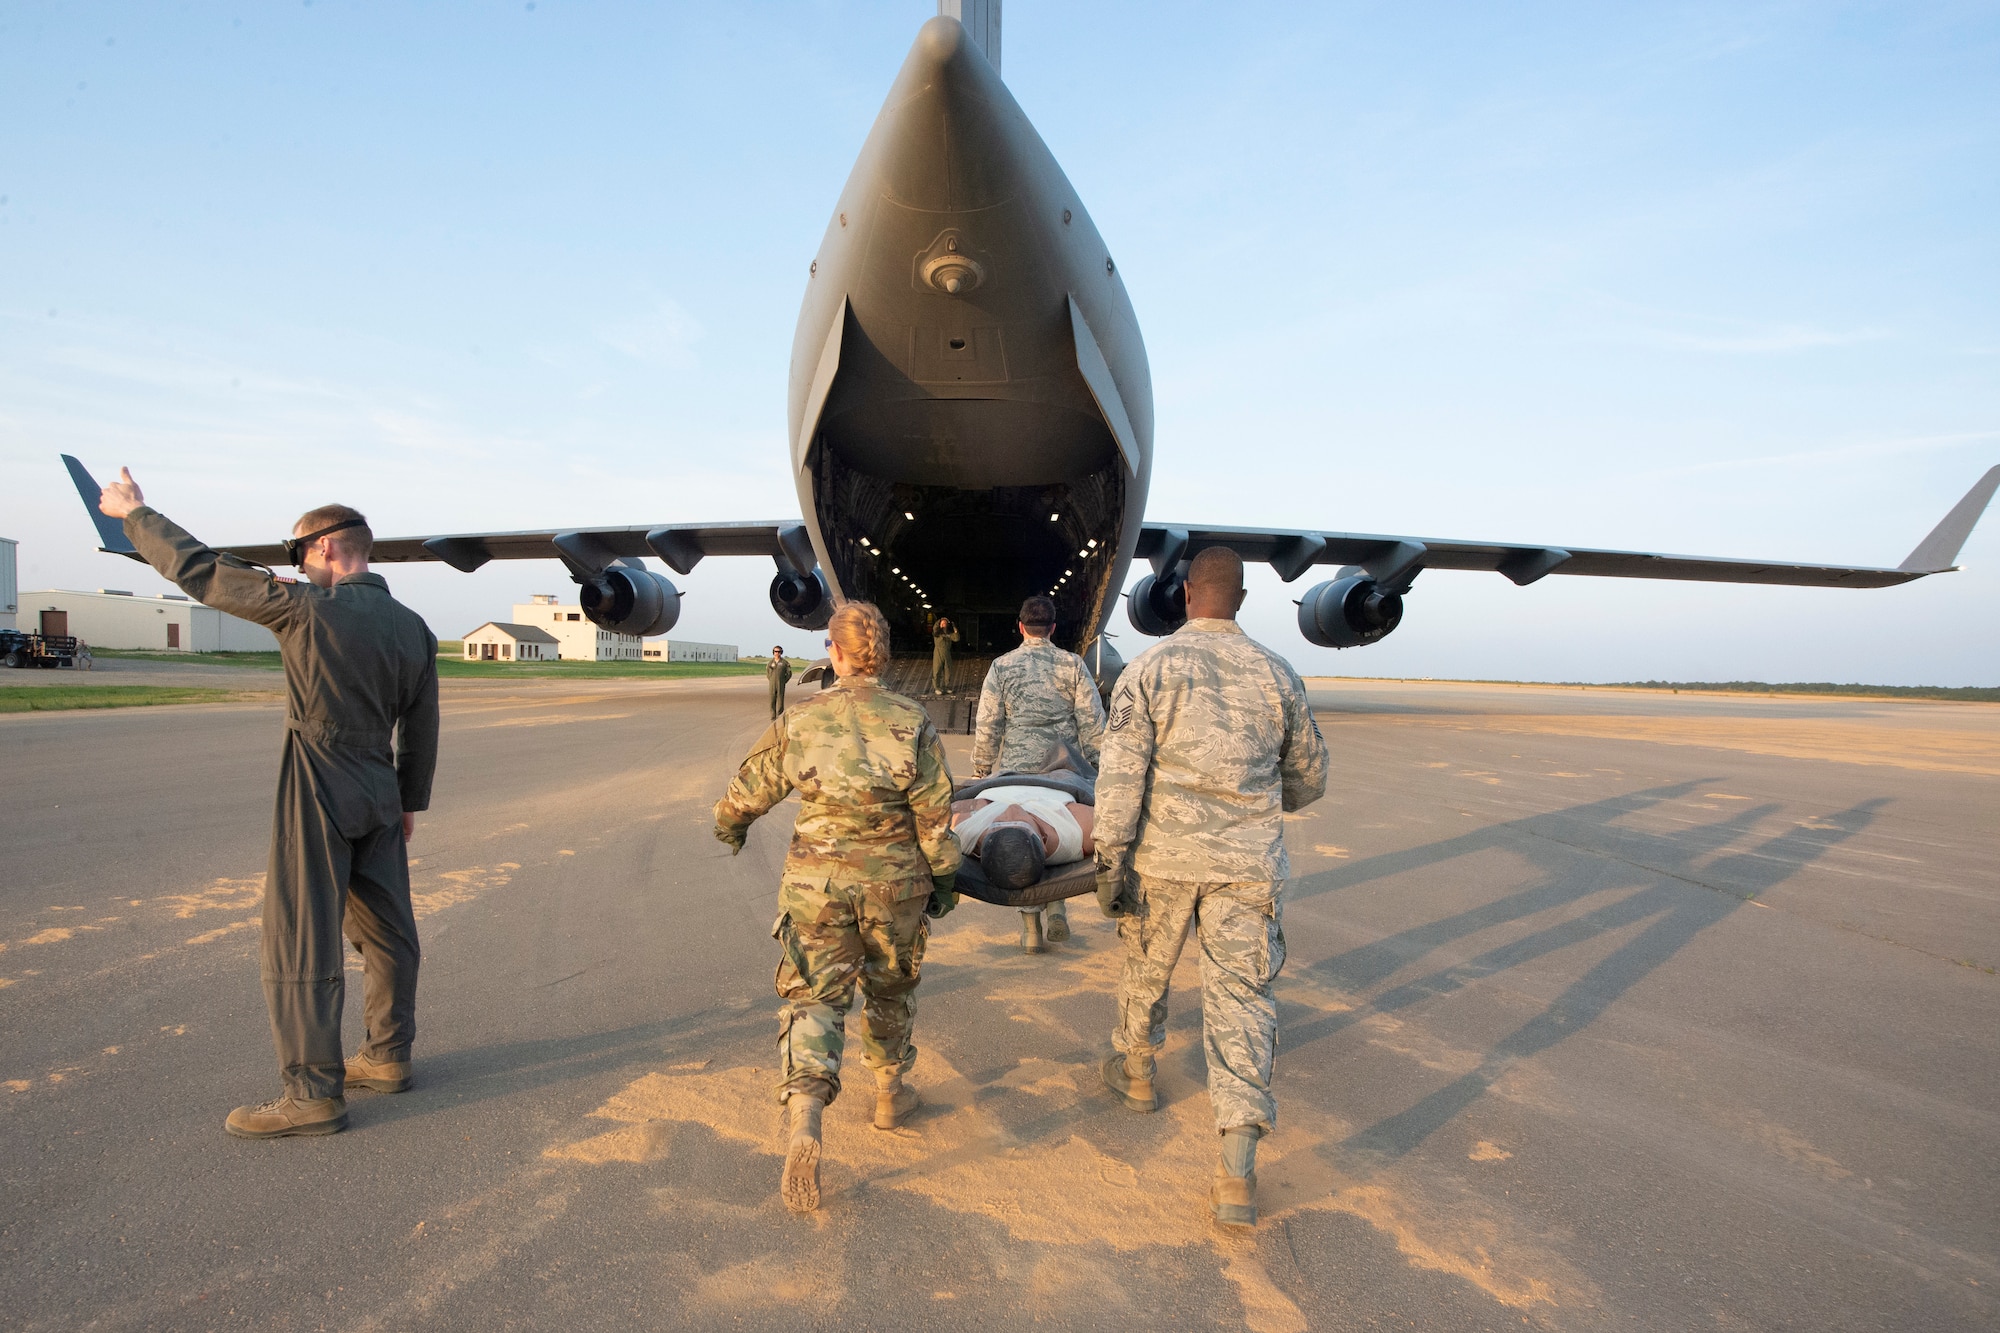 315th Aeromedical Evacuation Squadron ground crew members carry a simulated patient on a litter to board a Charleston-based C-17 Globemaster III during the Palmetto Challenge Exercise May 22 near Pope Field, North Carolina.